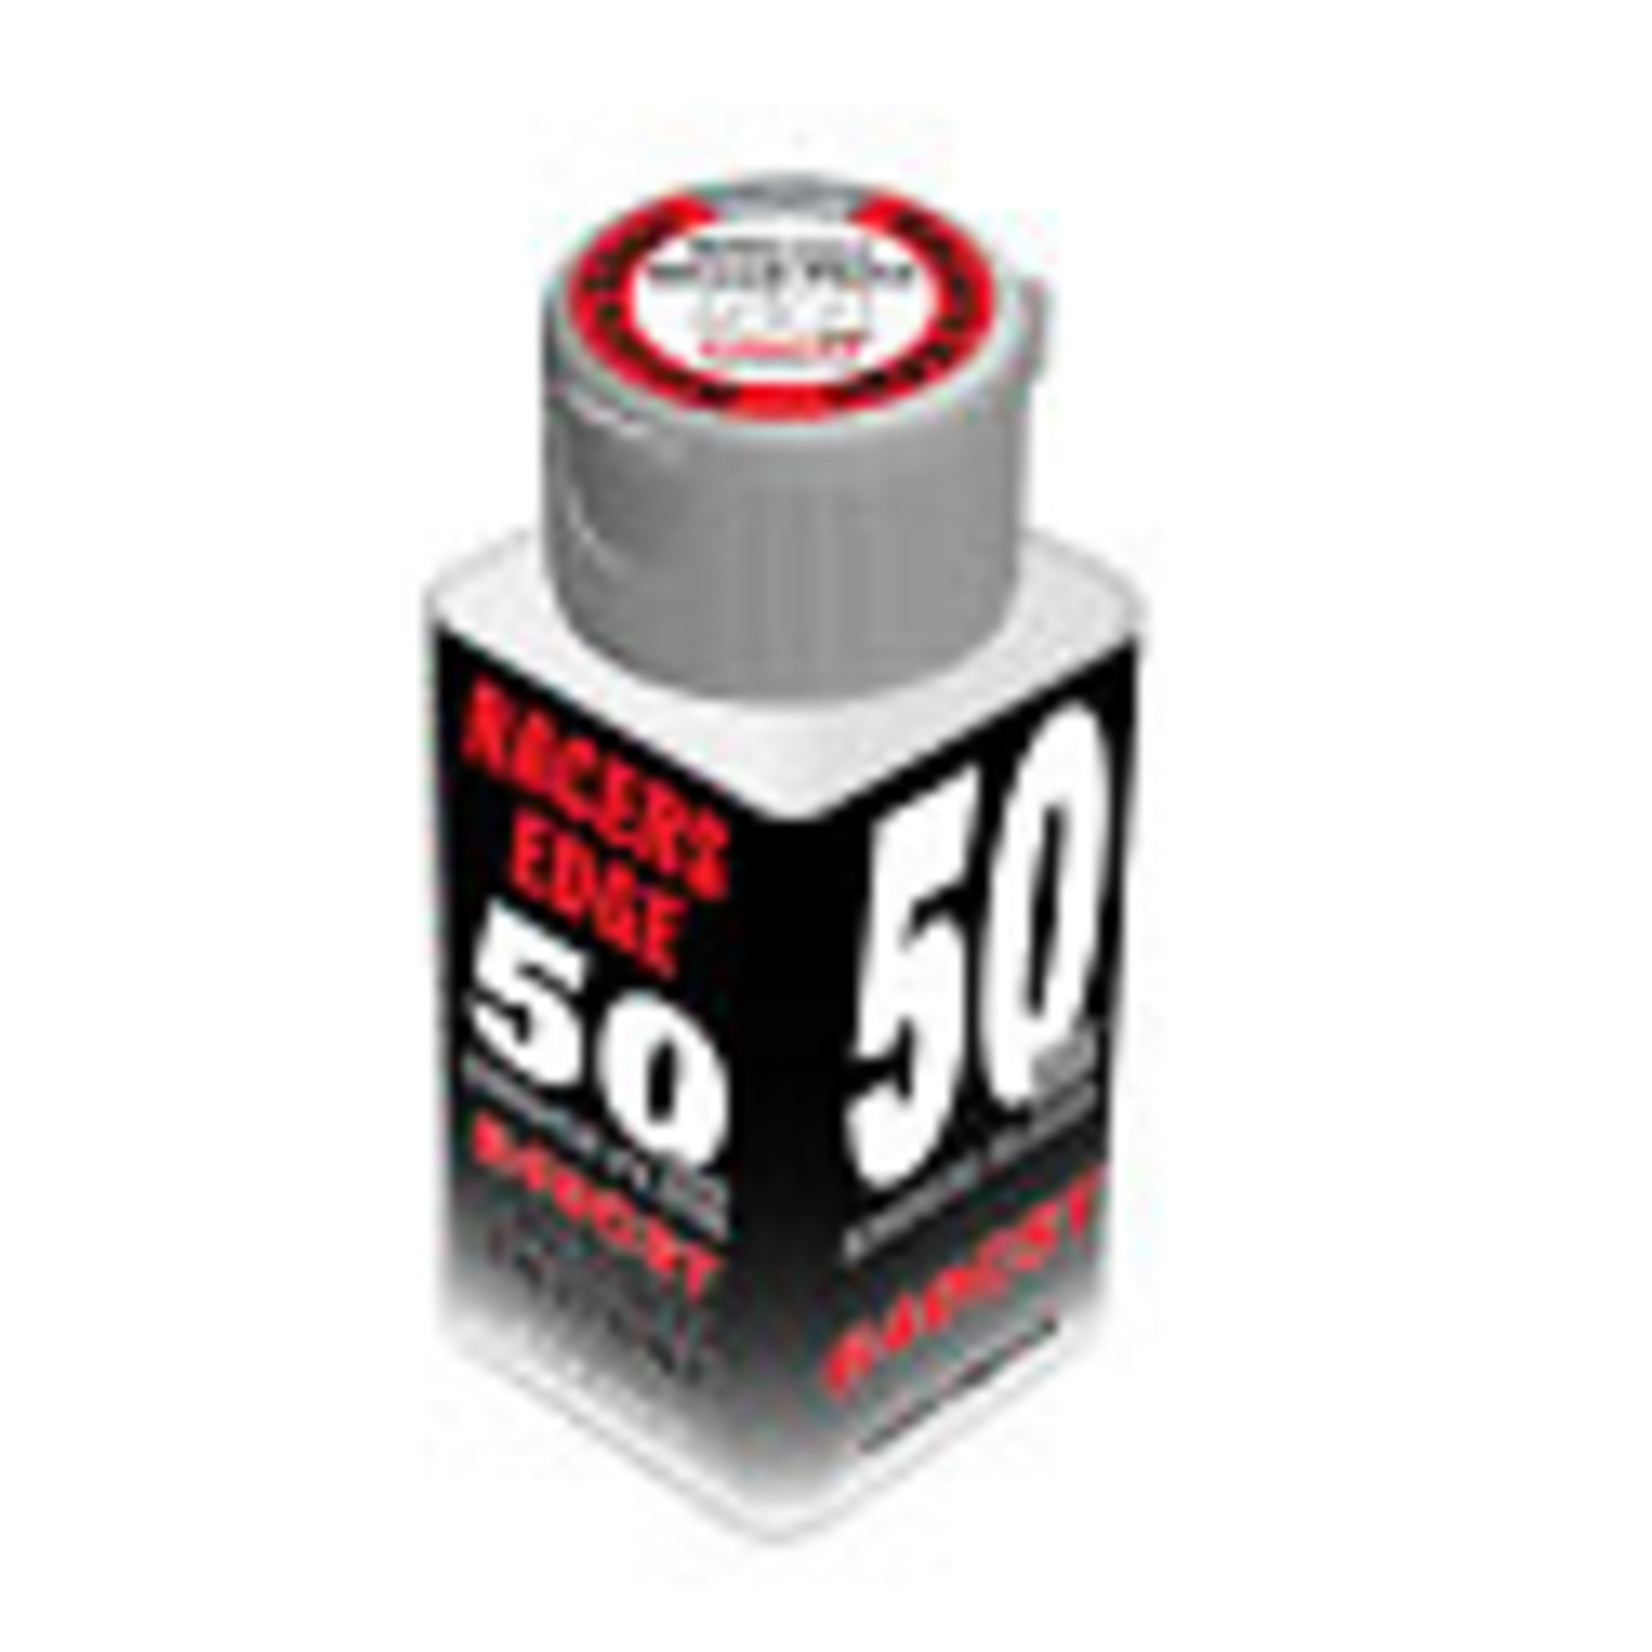 Racers Edge 50 Weight, 640cSt, 70ml 2.36oz Pure Silicone Shock Oil